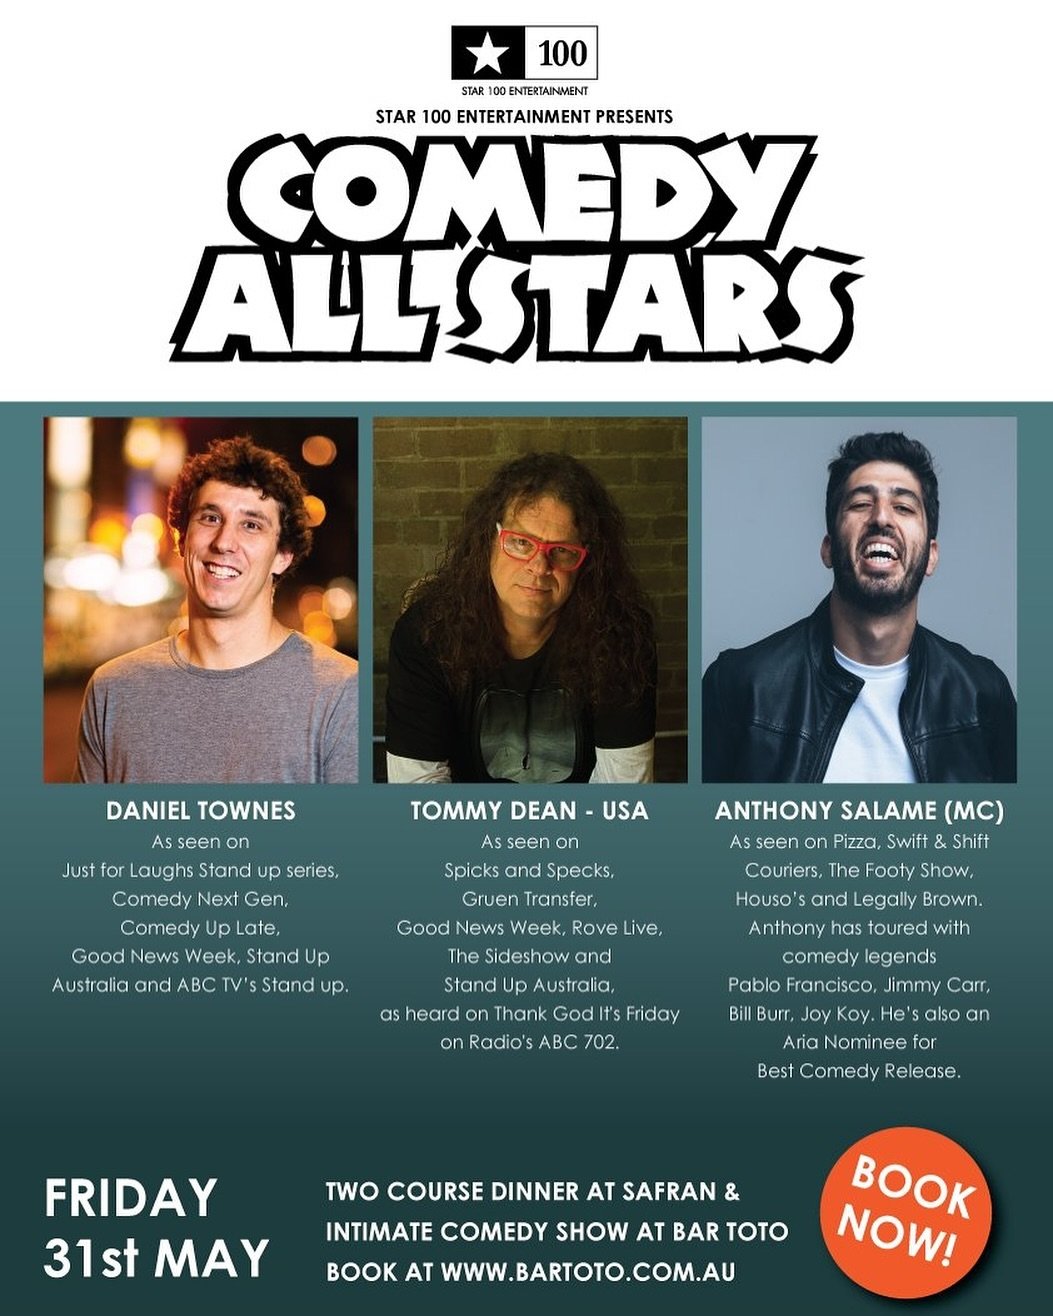 Comedy All Stars! Join us for a night of delicious food and drinks, followed by laughs with Daniel Townes, Tommy Dean, and Anthony Salame as your MC. Visit our website for all the details and to purchase tickets ✨